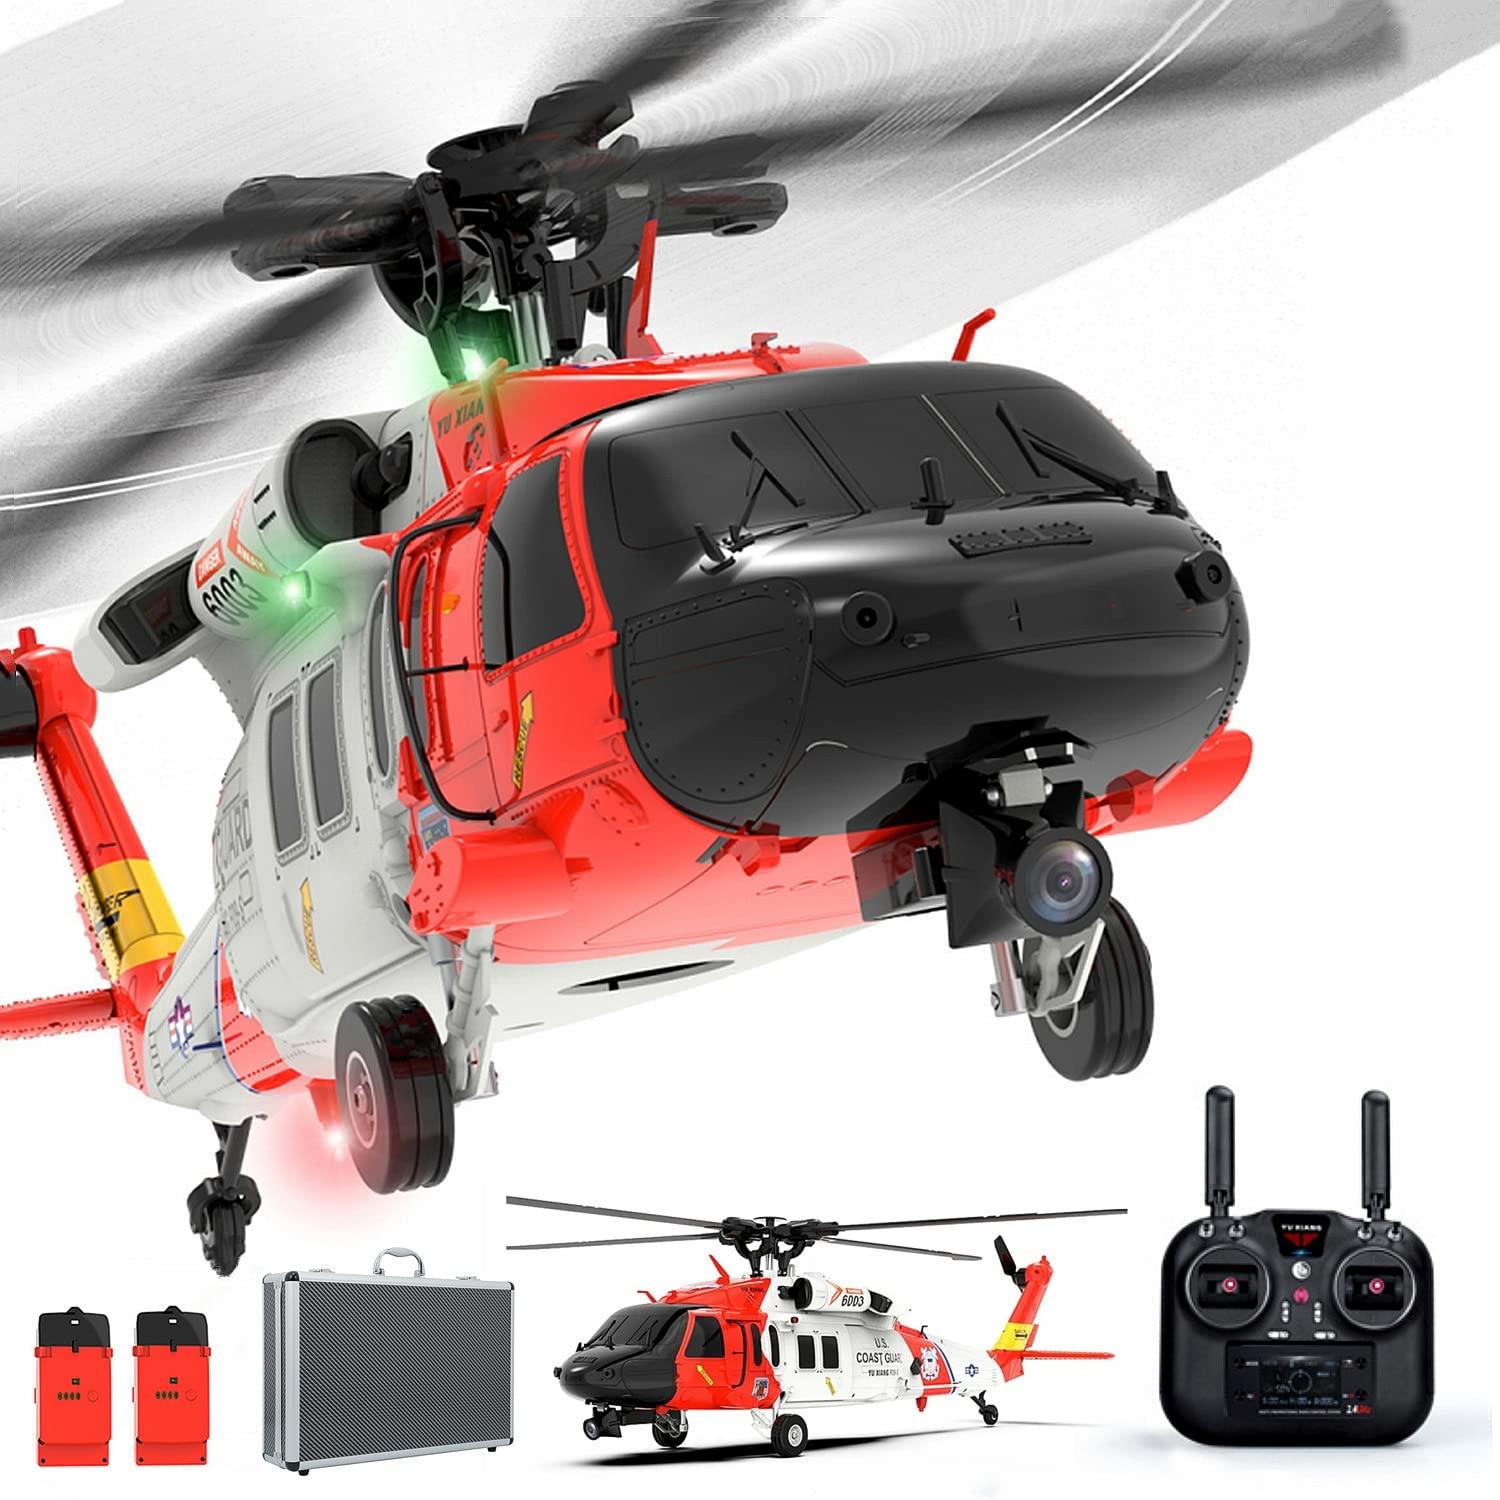 Remote Control Fighter Helicopter: Maximizing Your Remote Control Fighter Helicopter: Tips and Guidelines